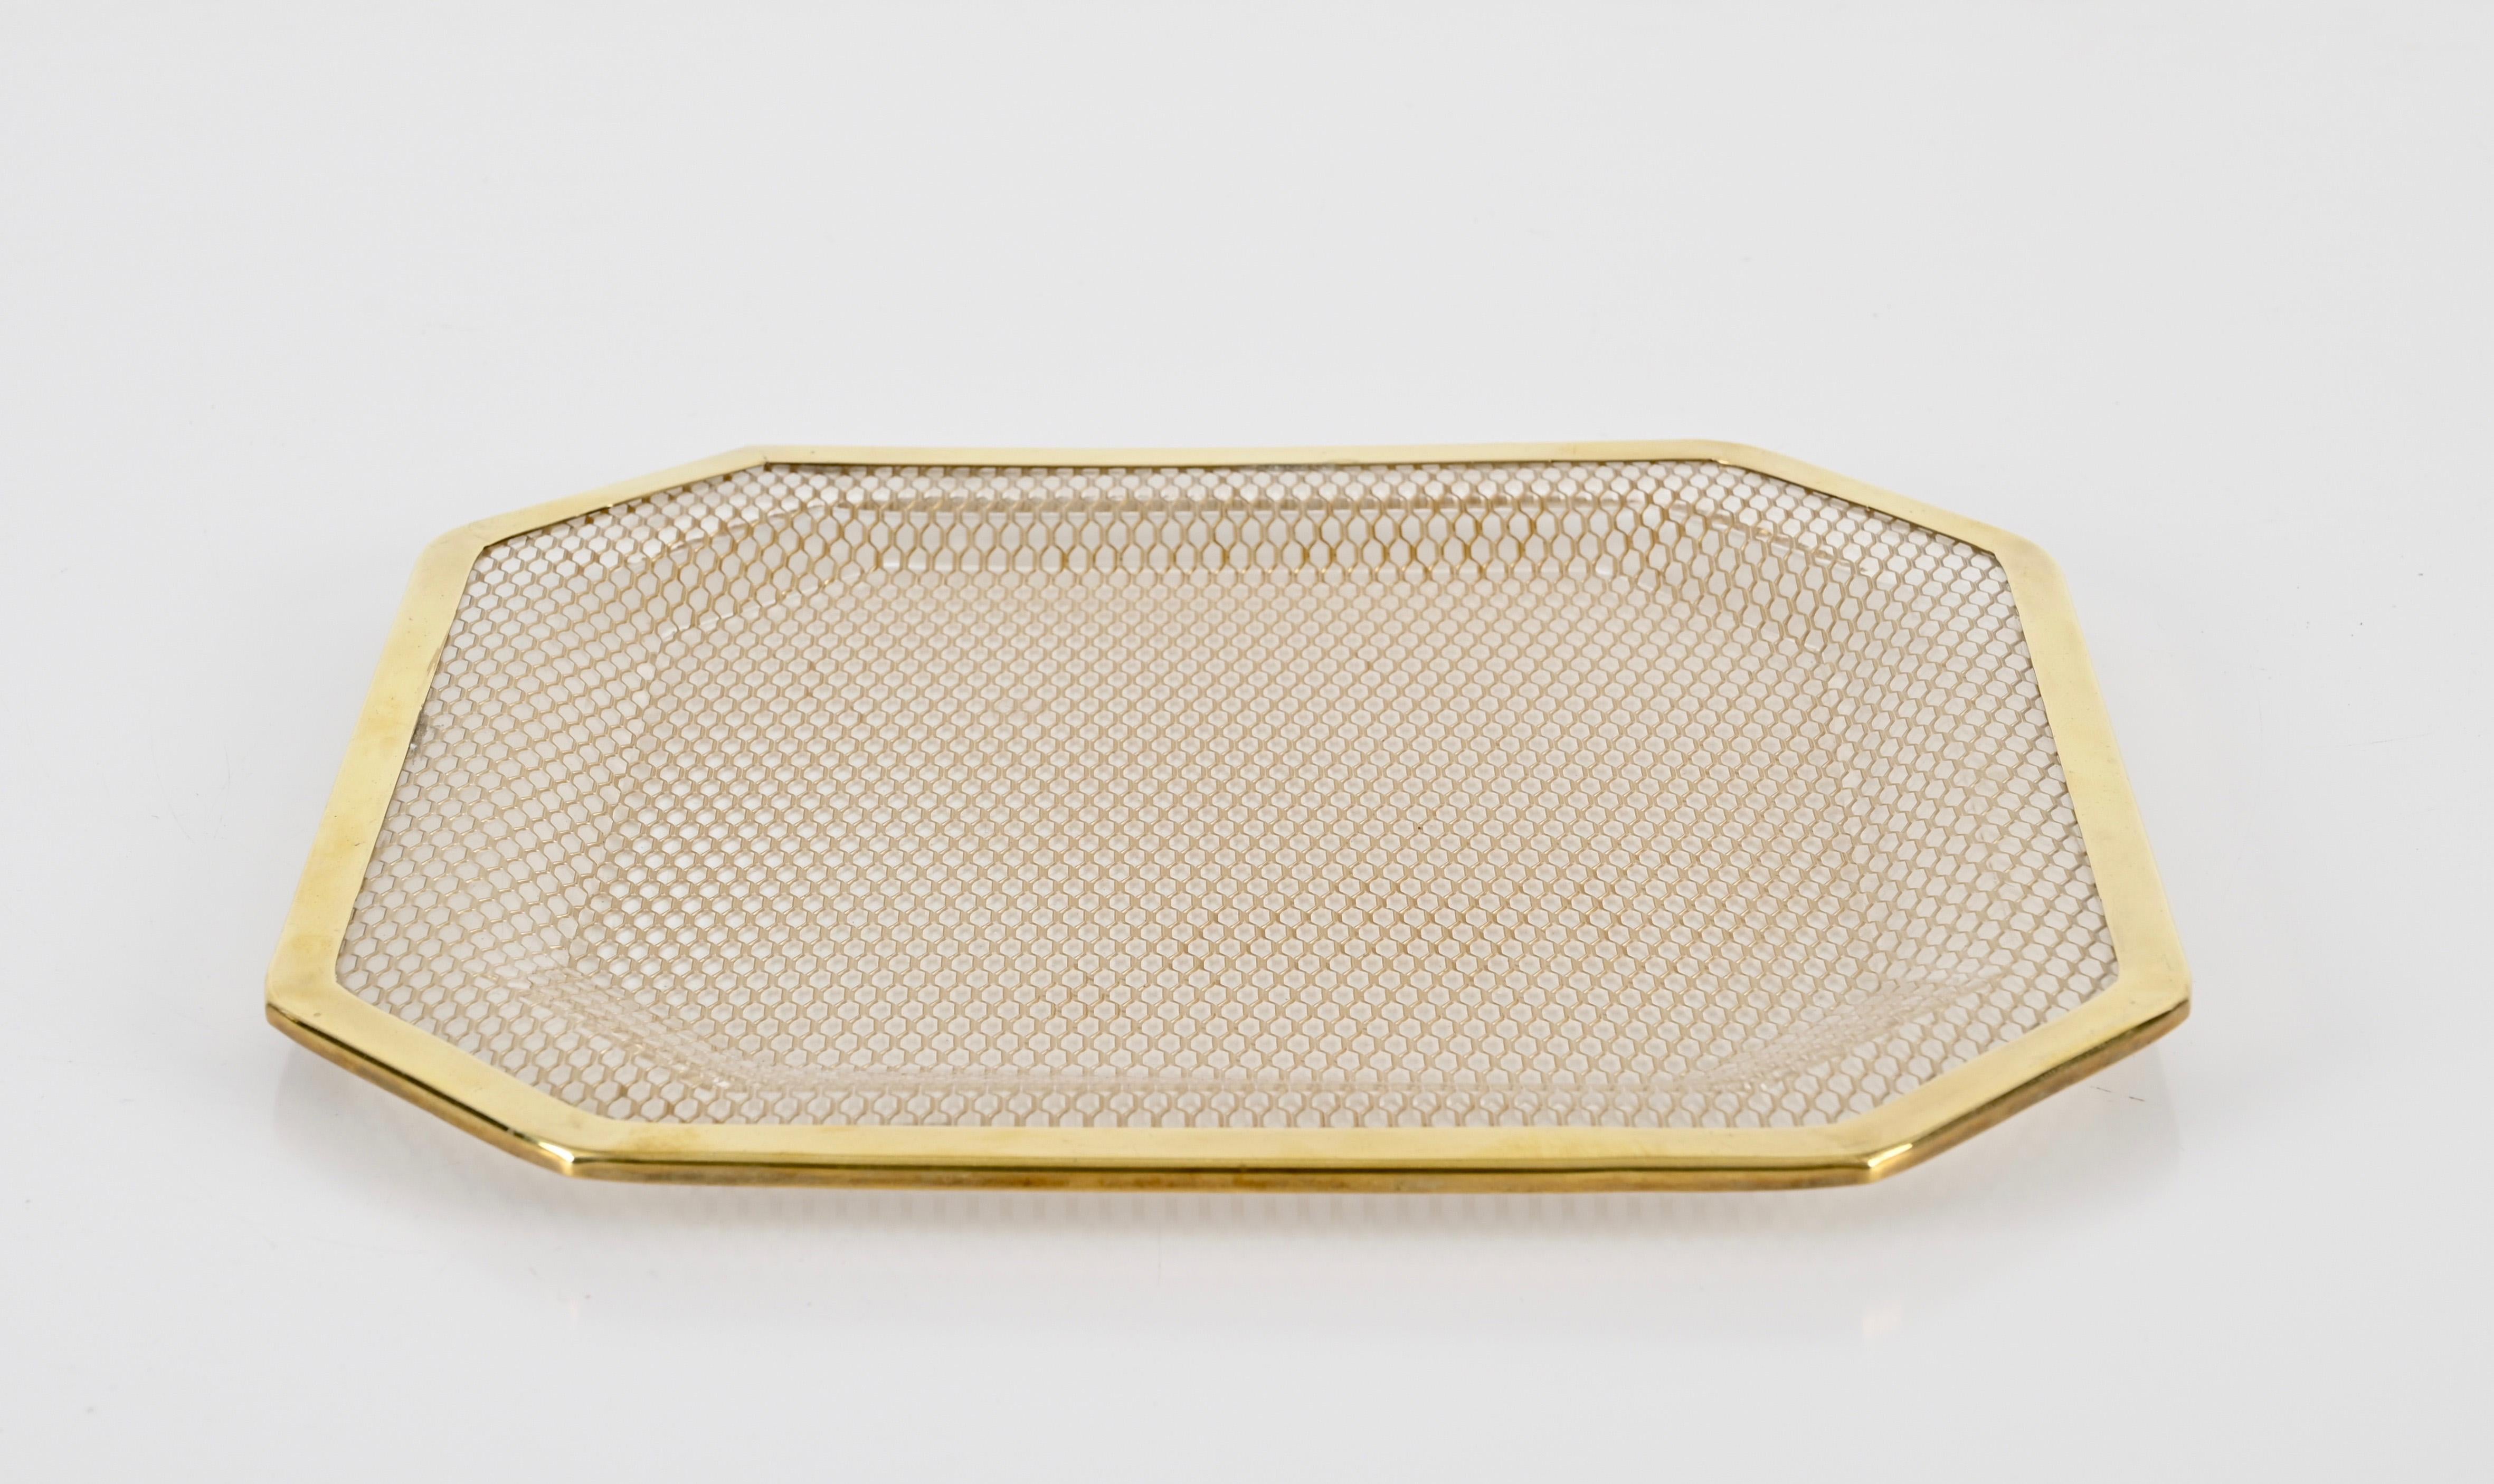 20th Century Midcentury Lucite and Brass Octagonal Italian Tray, Willy Rizzo Style, 1970s For Sale